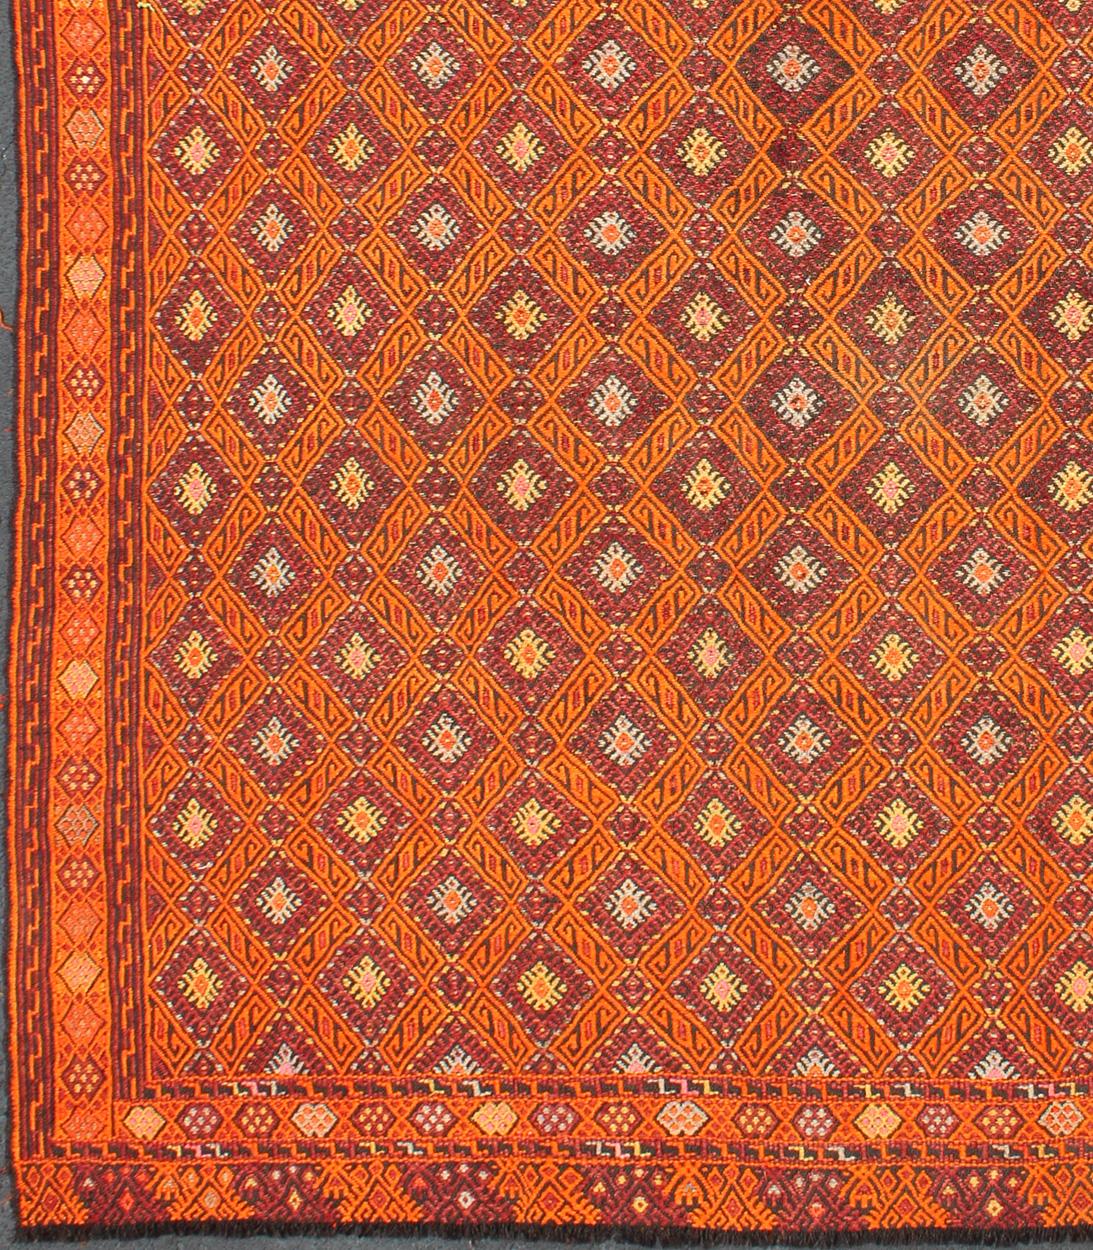 Vintage Embroidered Kilim in Orange, Red, light Blue and yellow Colors.
The simple symmetric diamond form in this piece is a timeless plaid pattern with wide center stripes flanked by linear accents. Their precise intersecting arrangement